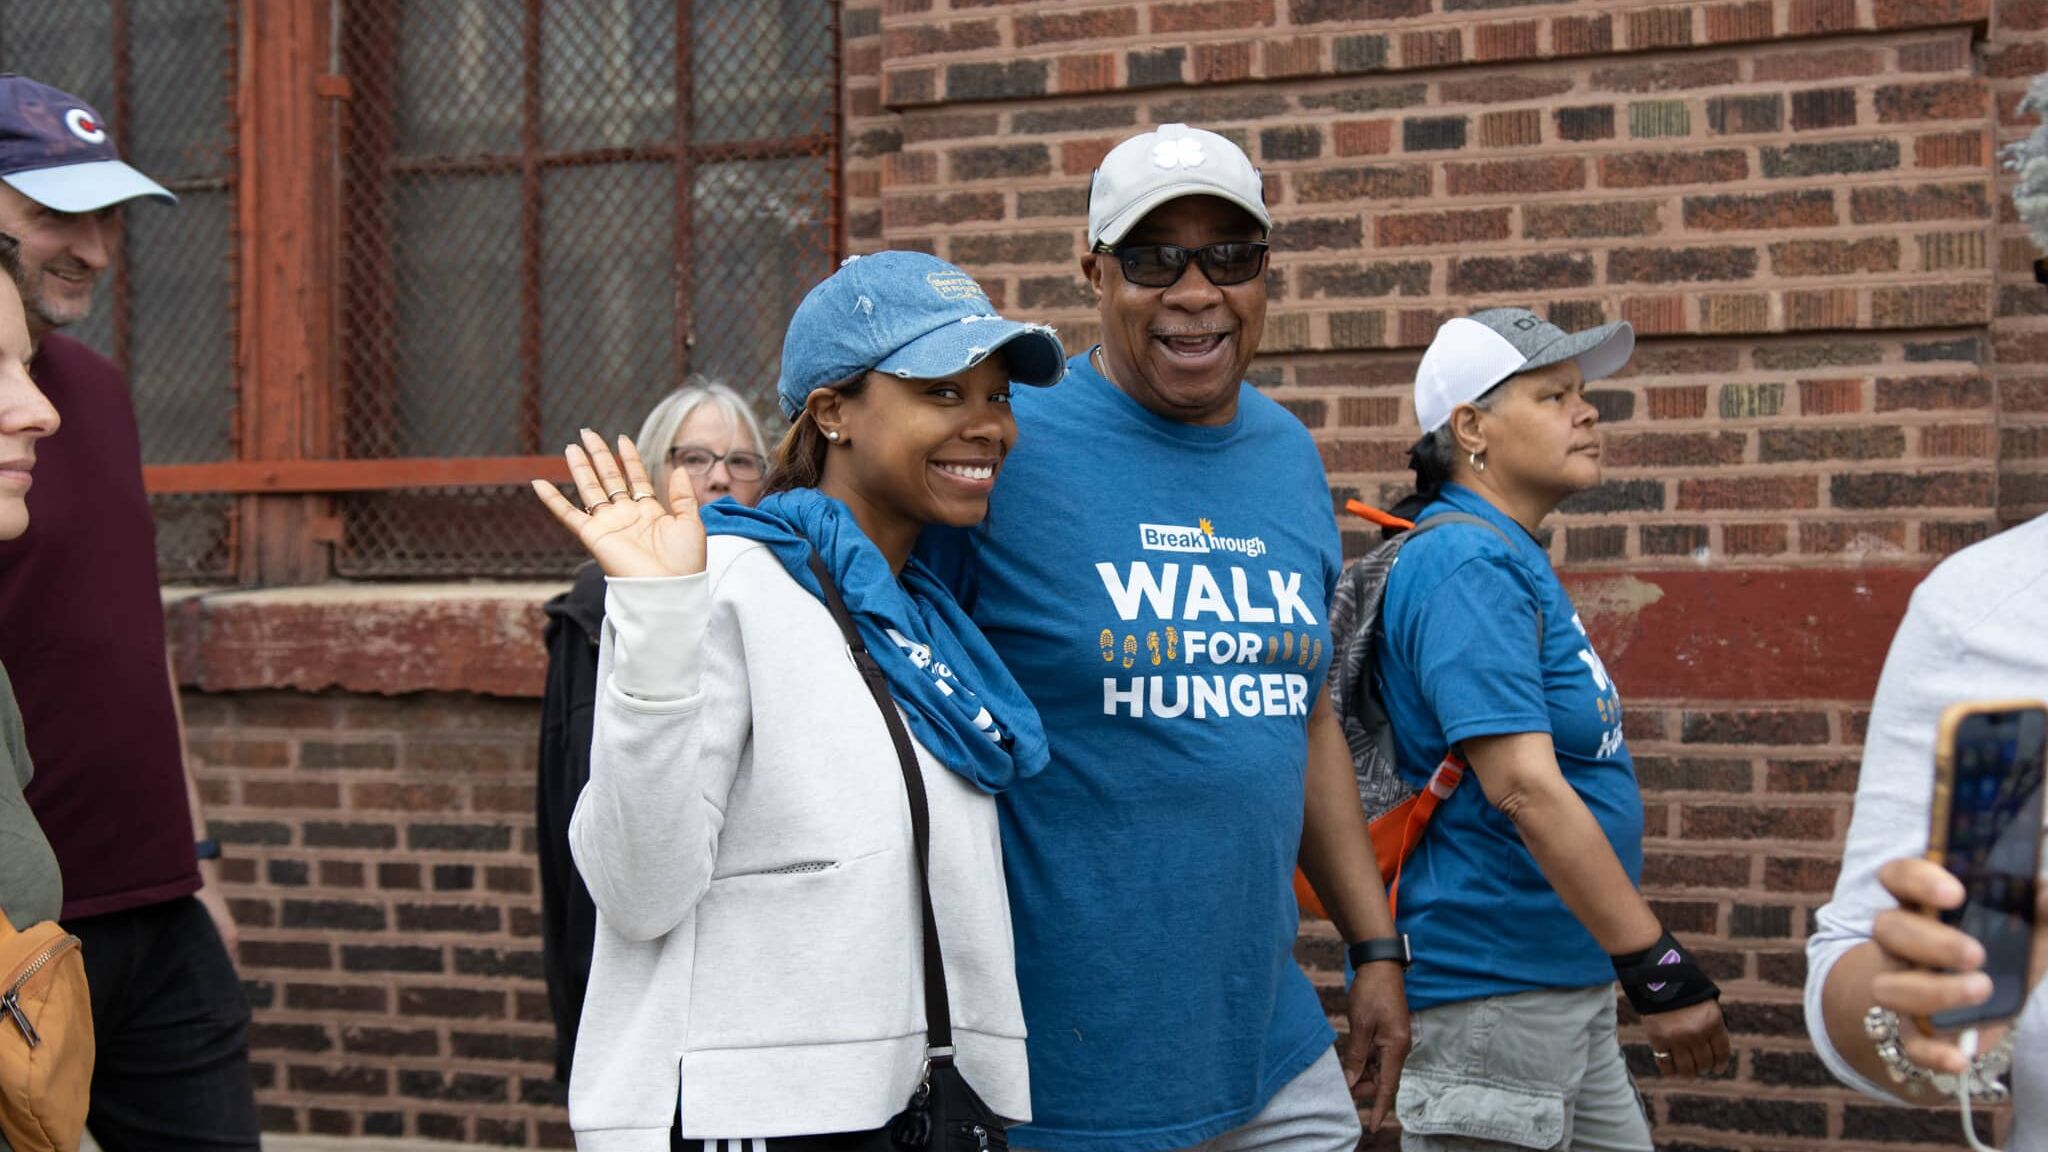 More Than 600 People Participate in Walk for Hunger 2